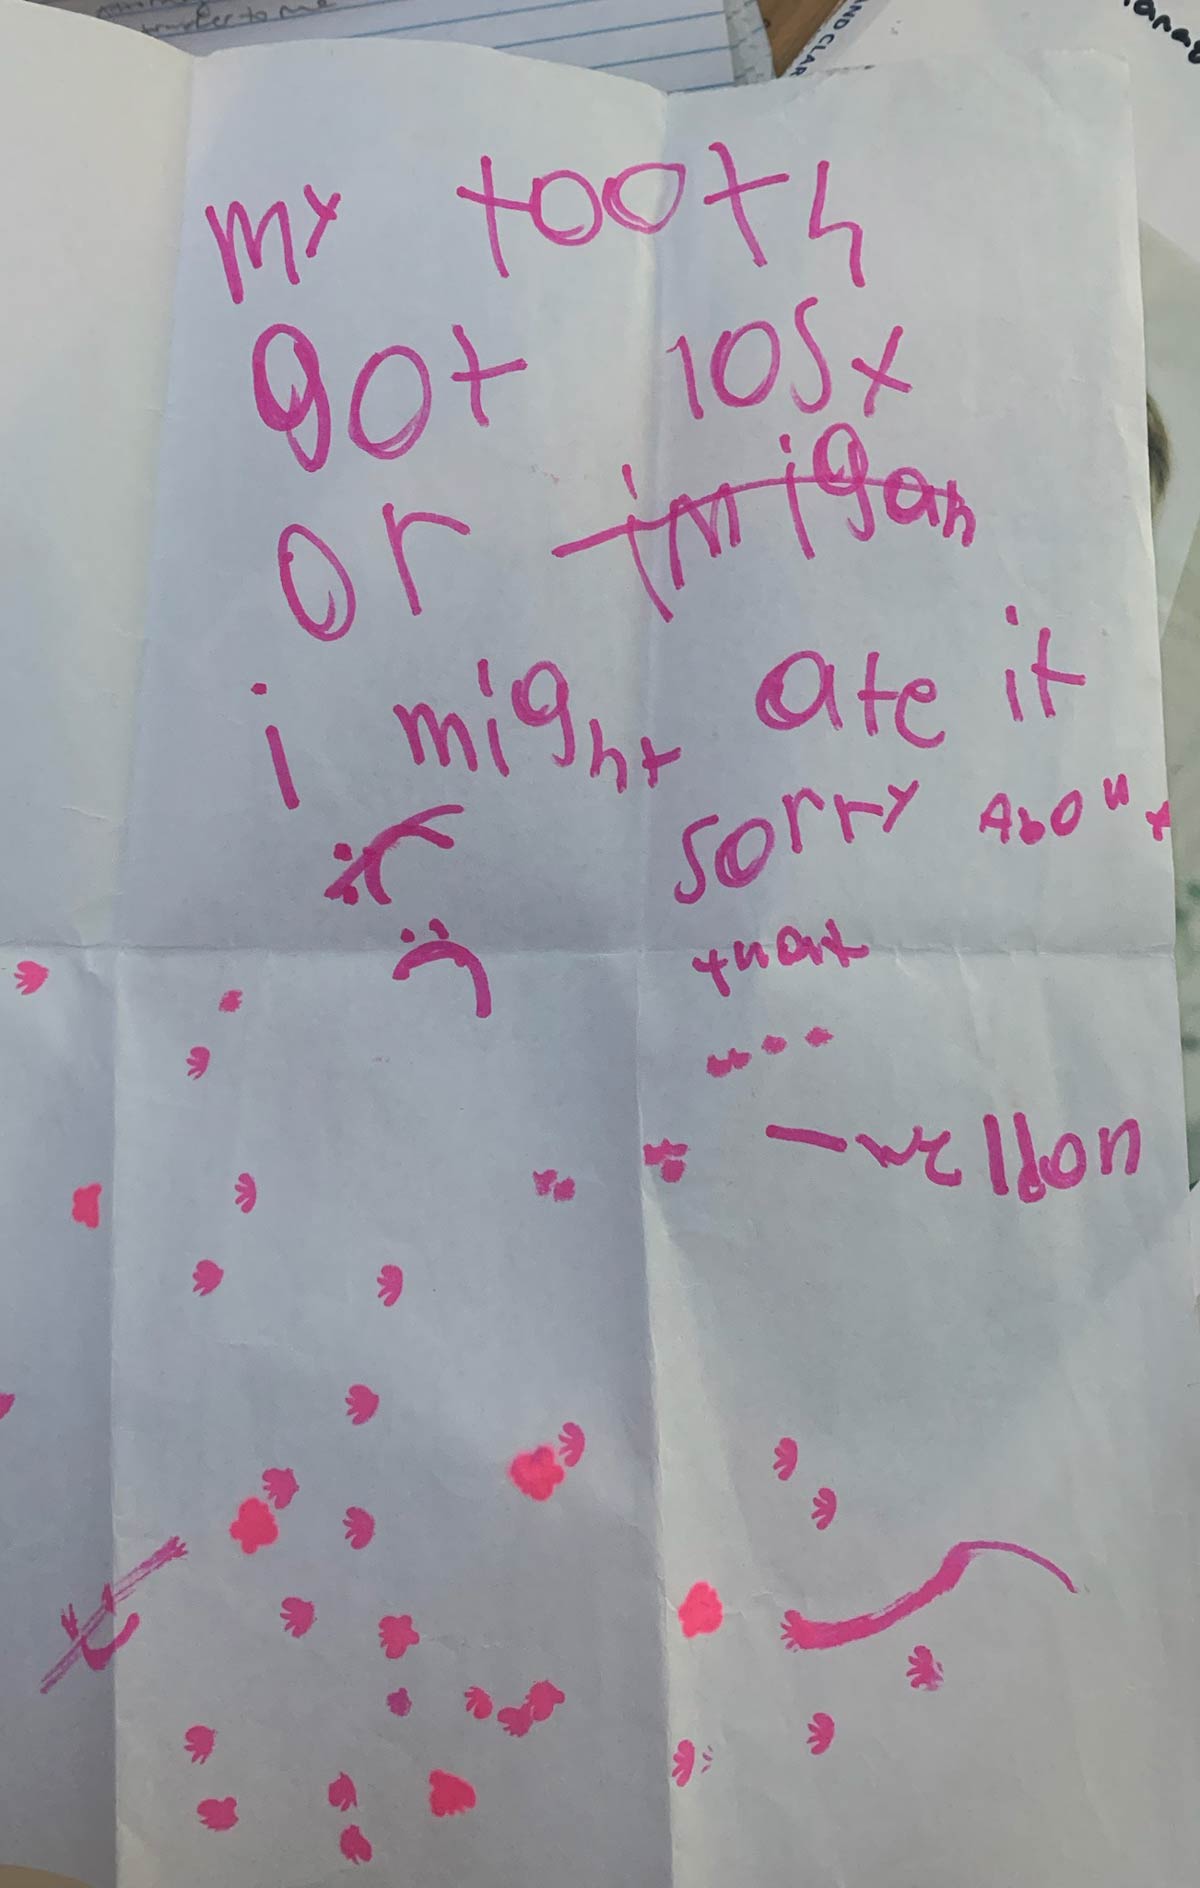 My little brother's apology to the tooth fairy for losing his tooth